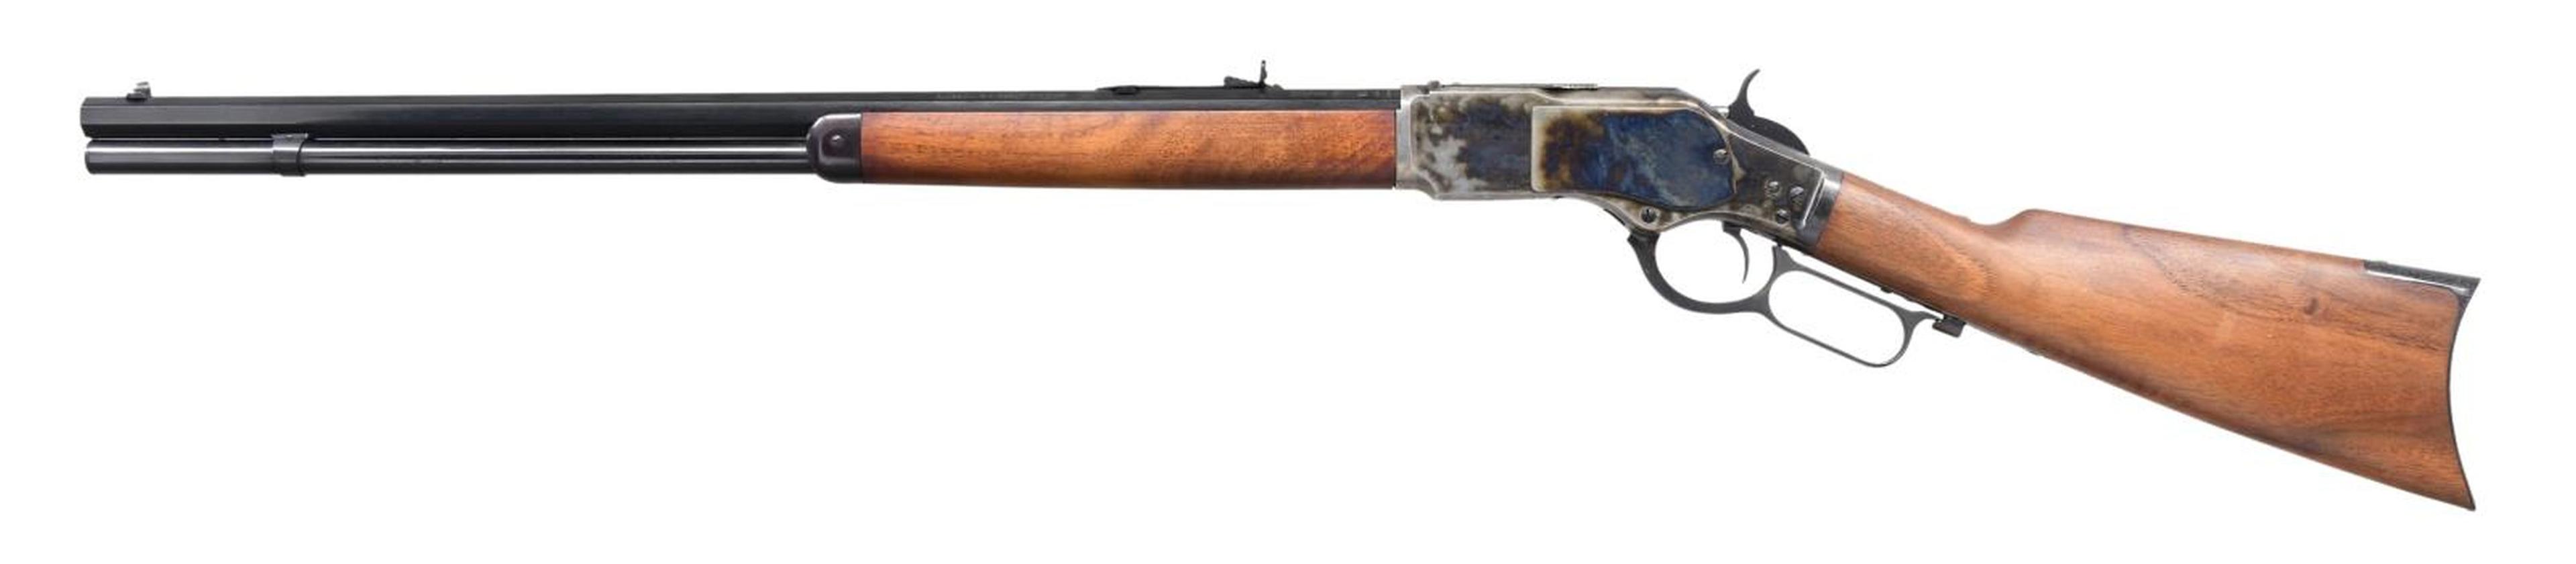 NAVY ARMS 1873 SPORTING LEVER ACTION RIFLE.